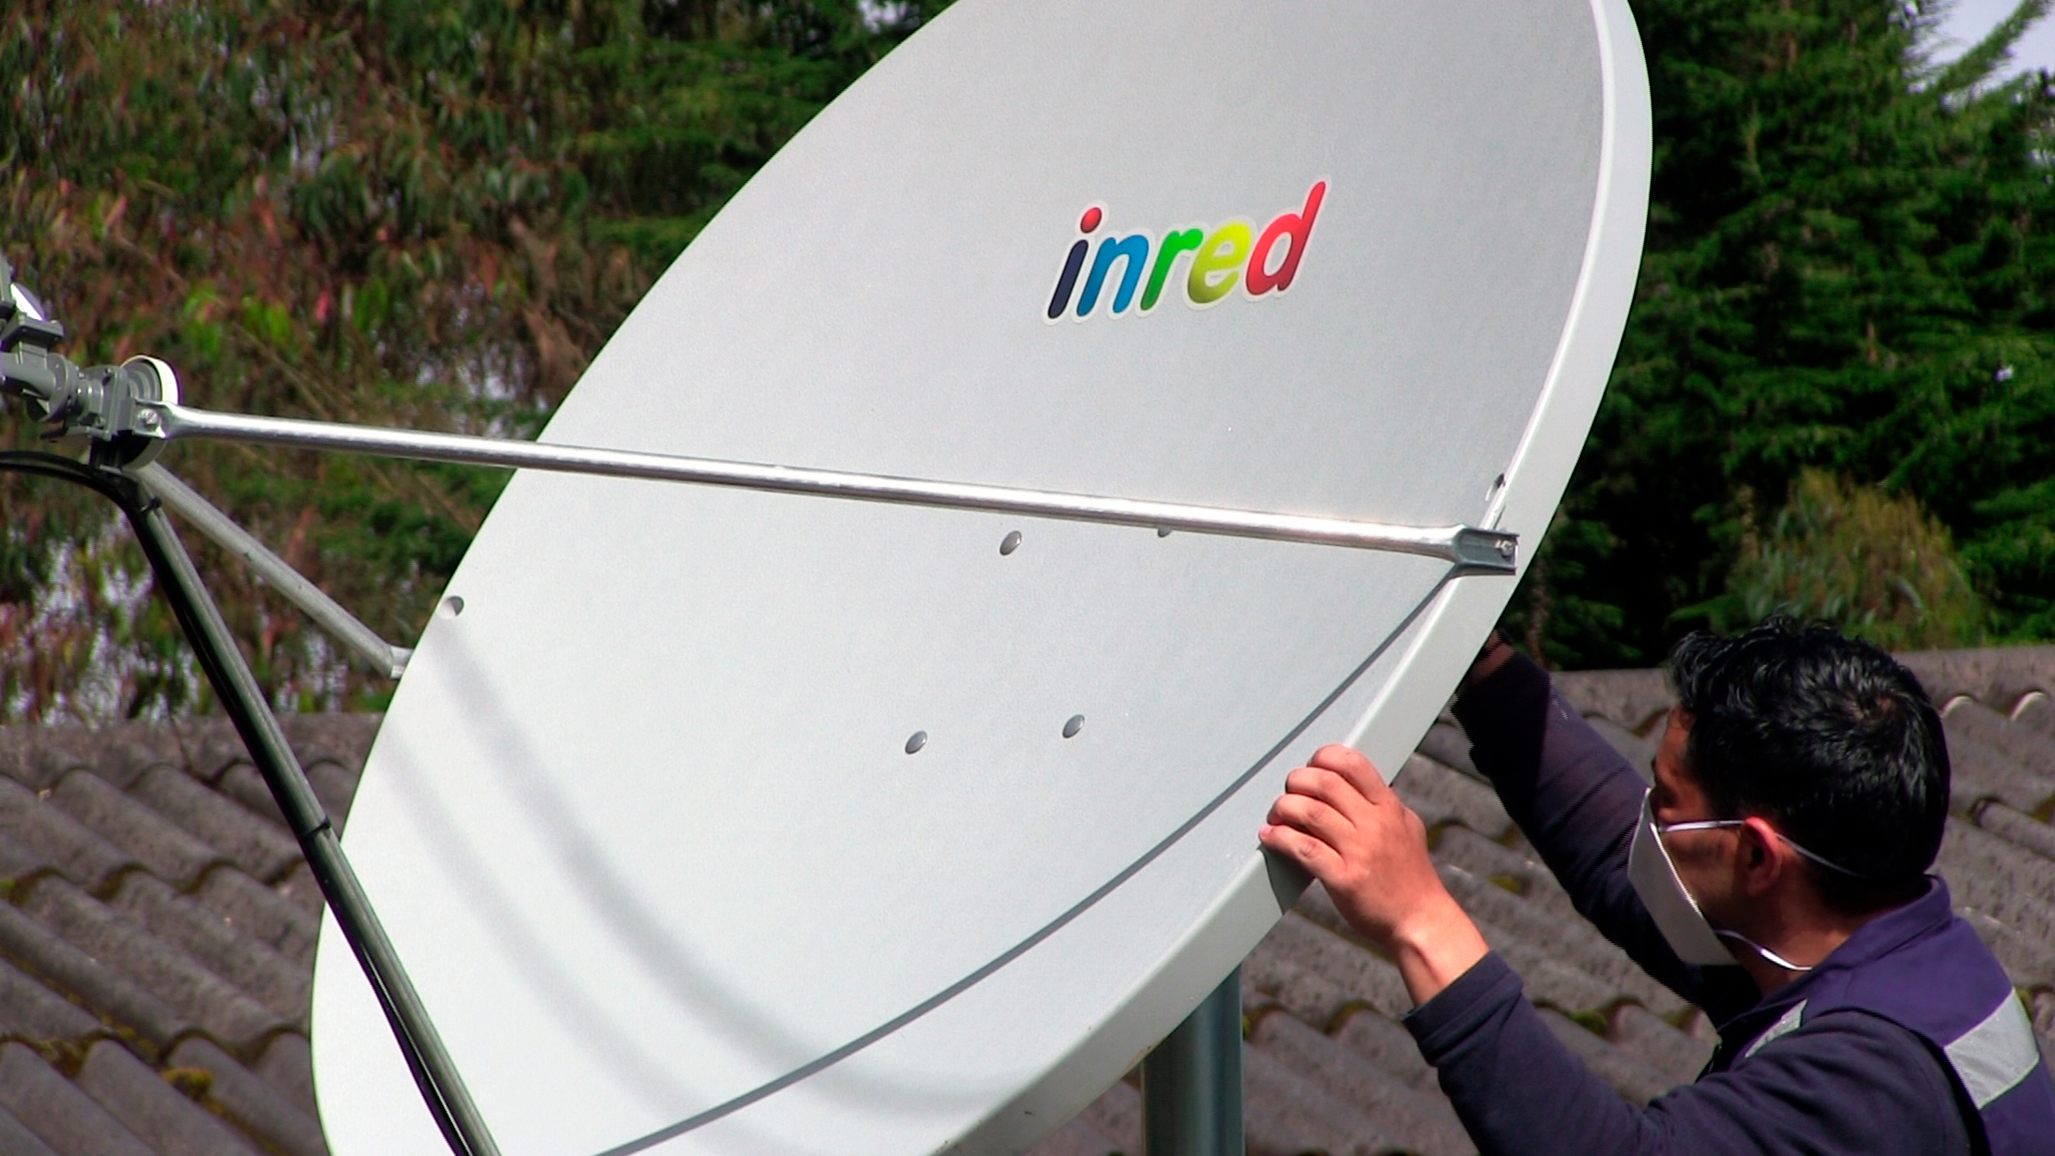 INRED to Provide Wi-Fi Services to Remote Areas in Colombia via SES Satellites